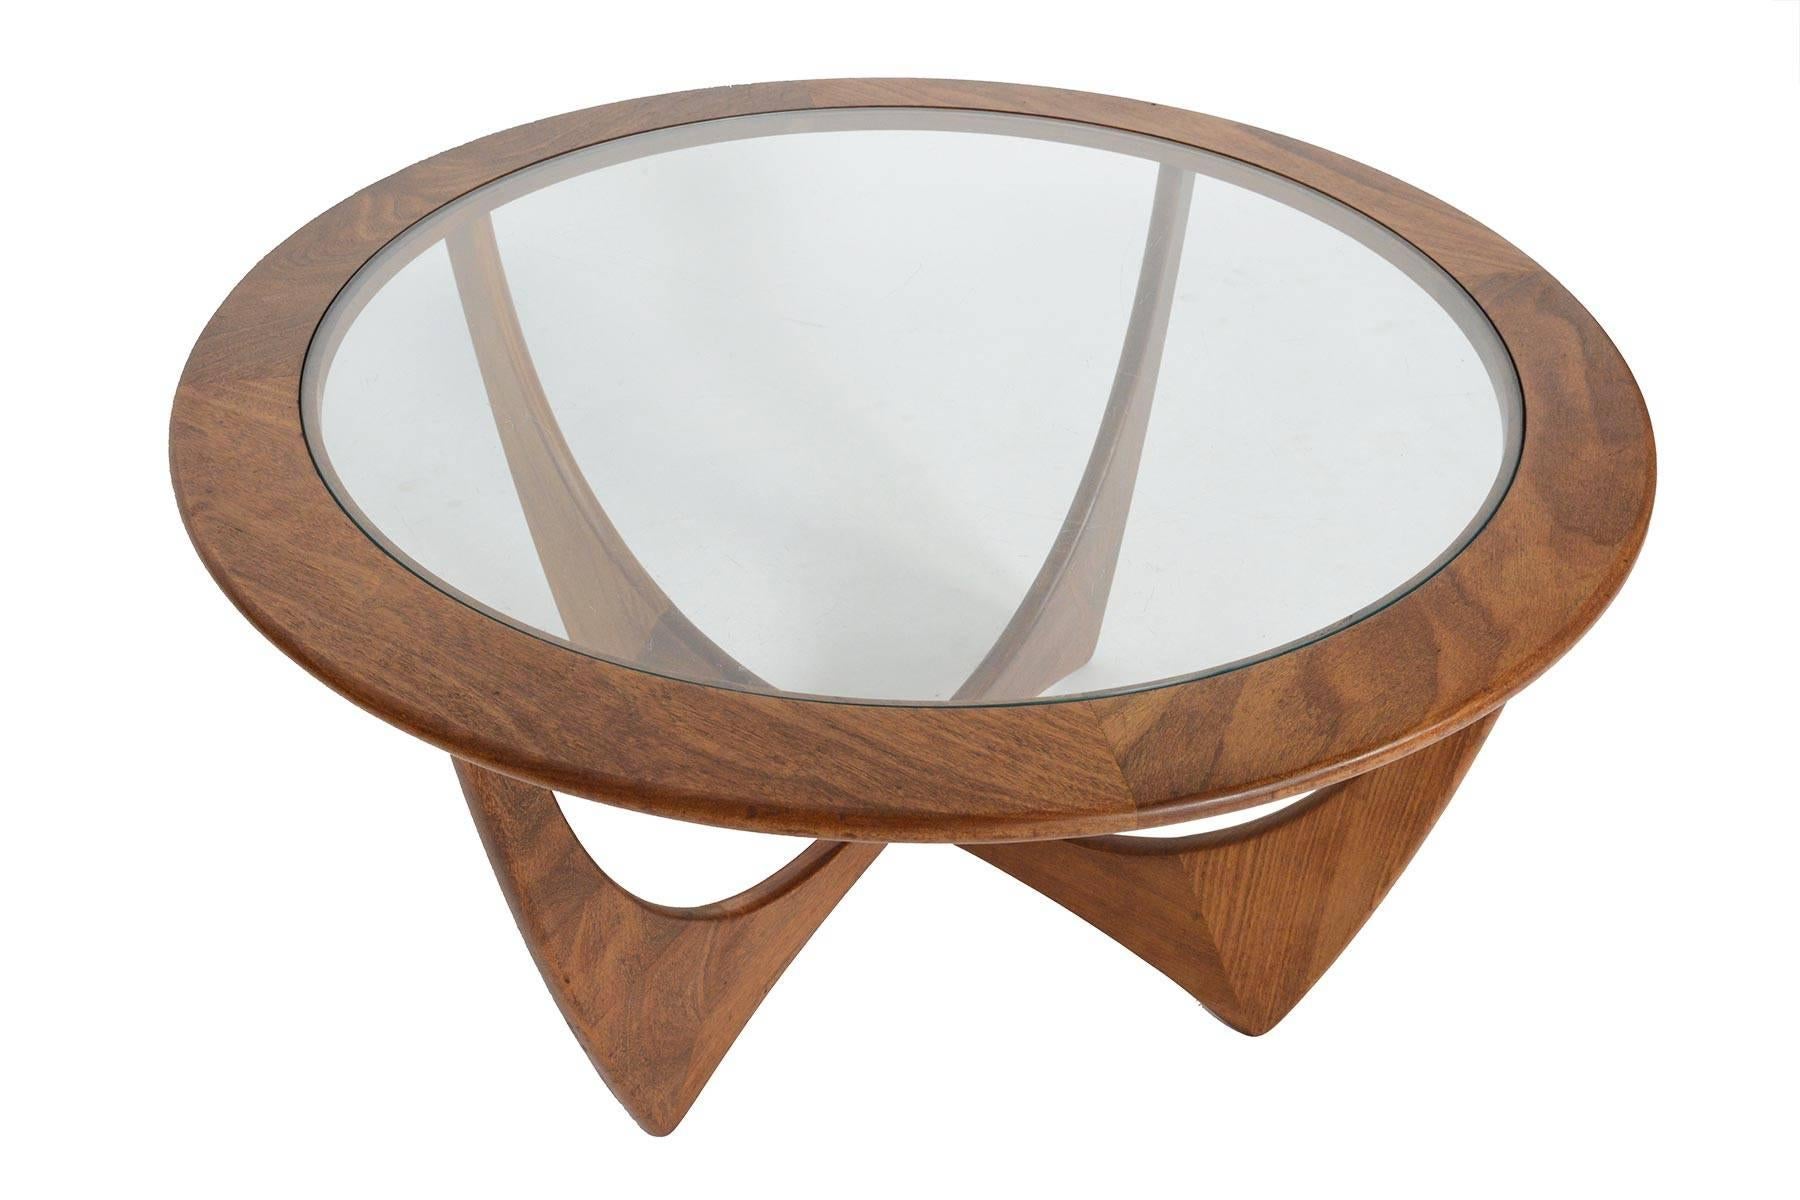 This iconic Mid-Century Modern round afromosia and glass coffee table was designed by Victor Wilkins for G Plan's 